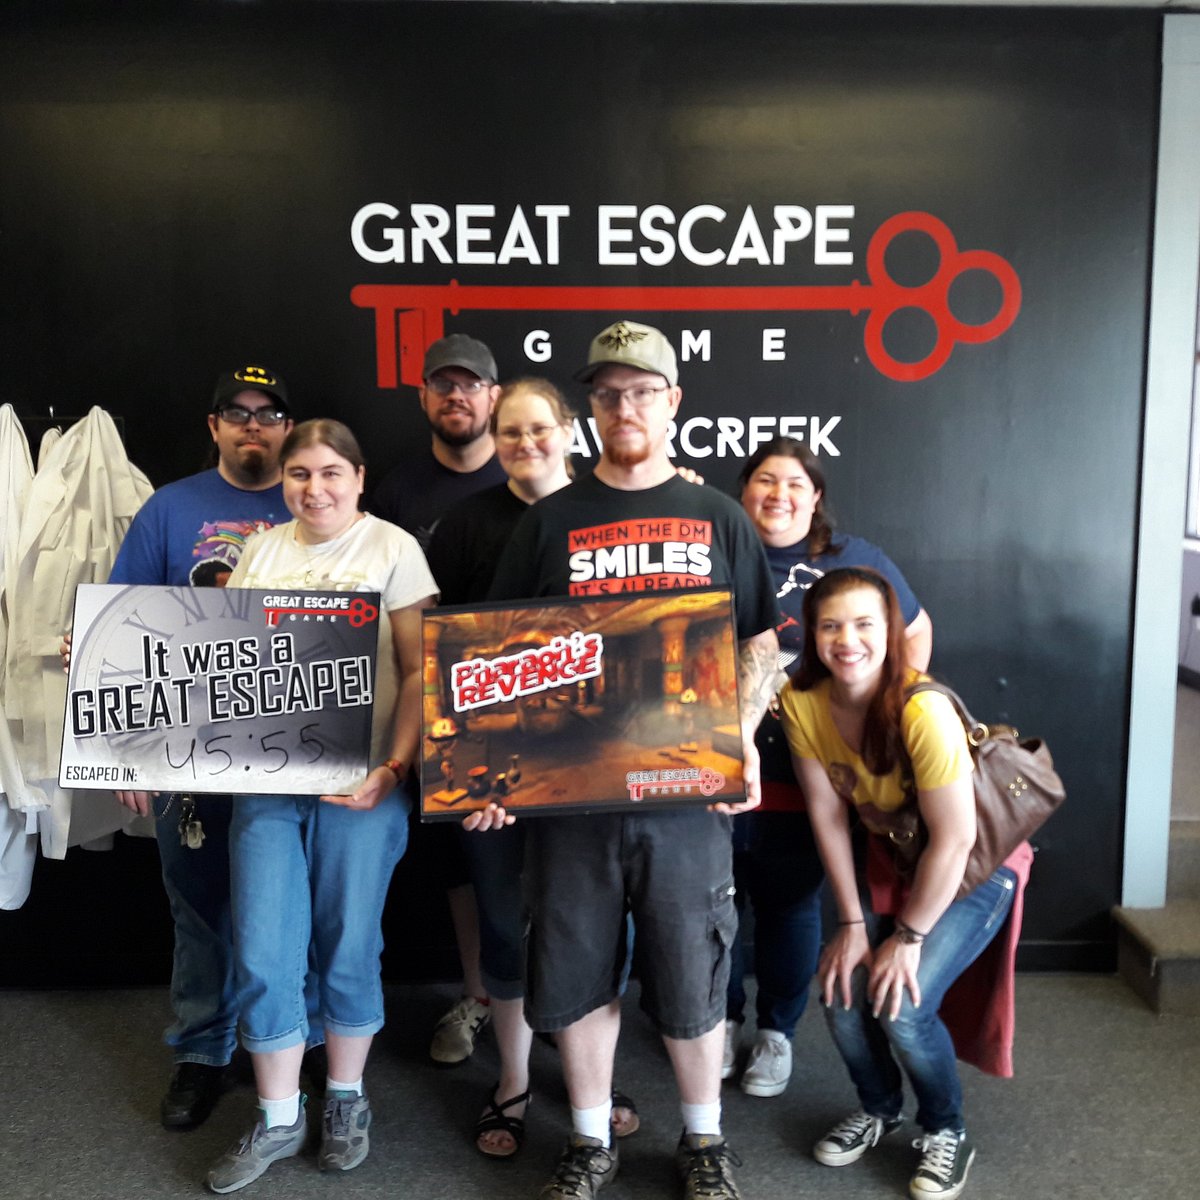 Escape rooms: 5 reasons to need to try them in Dayton